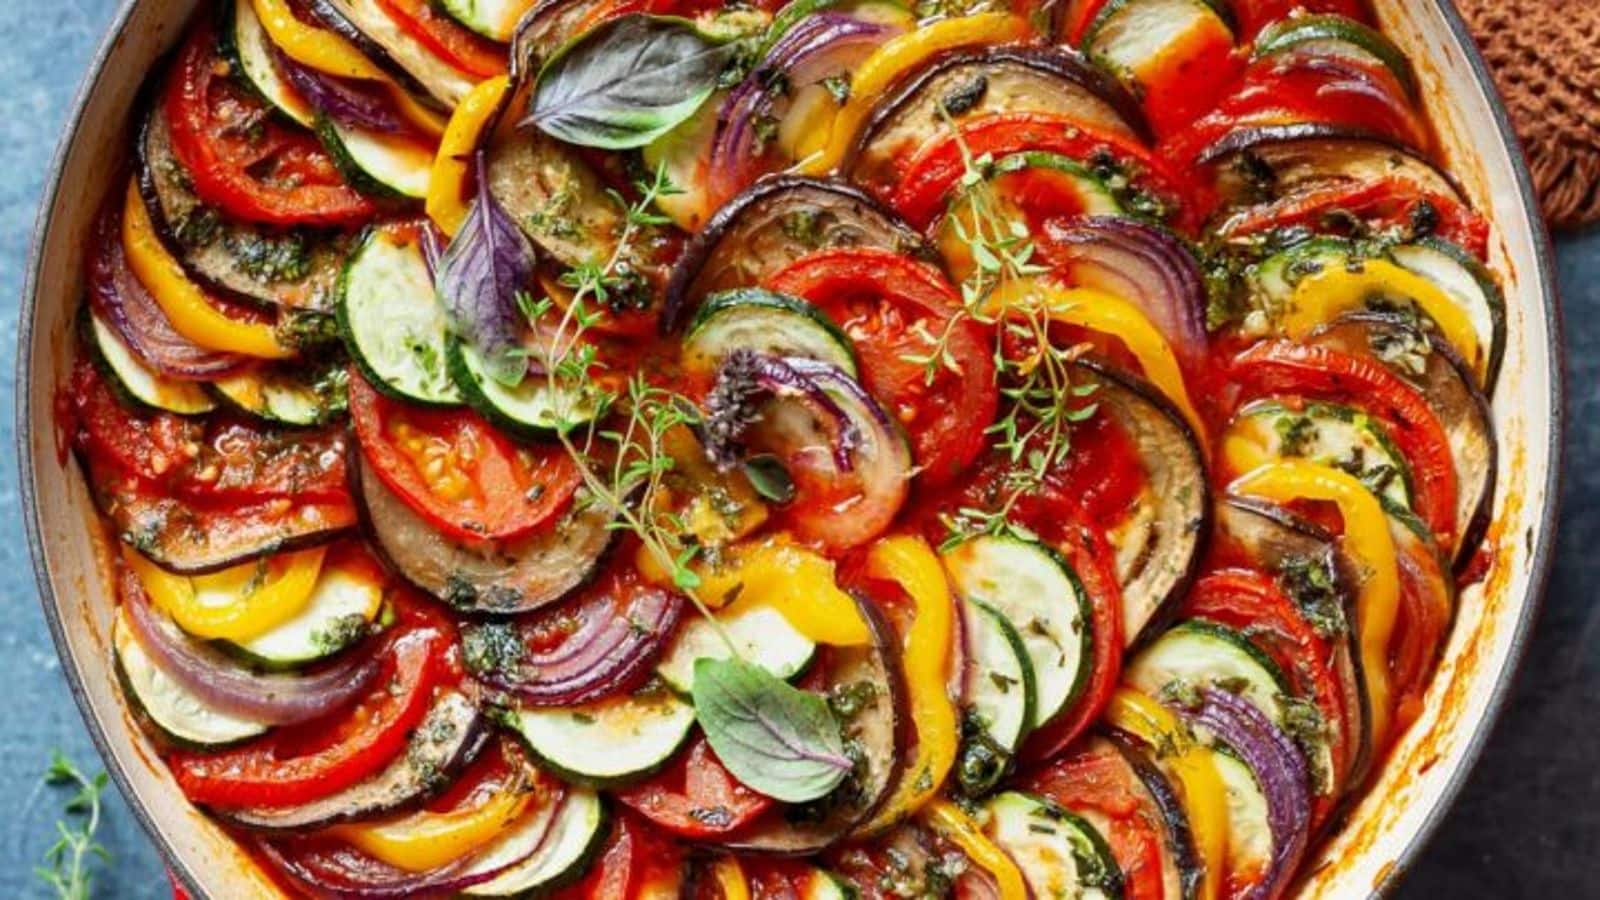 Try this classic French ratatouille recipe today